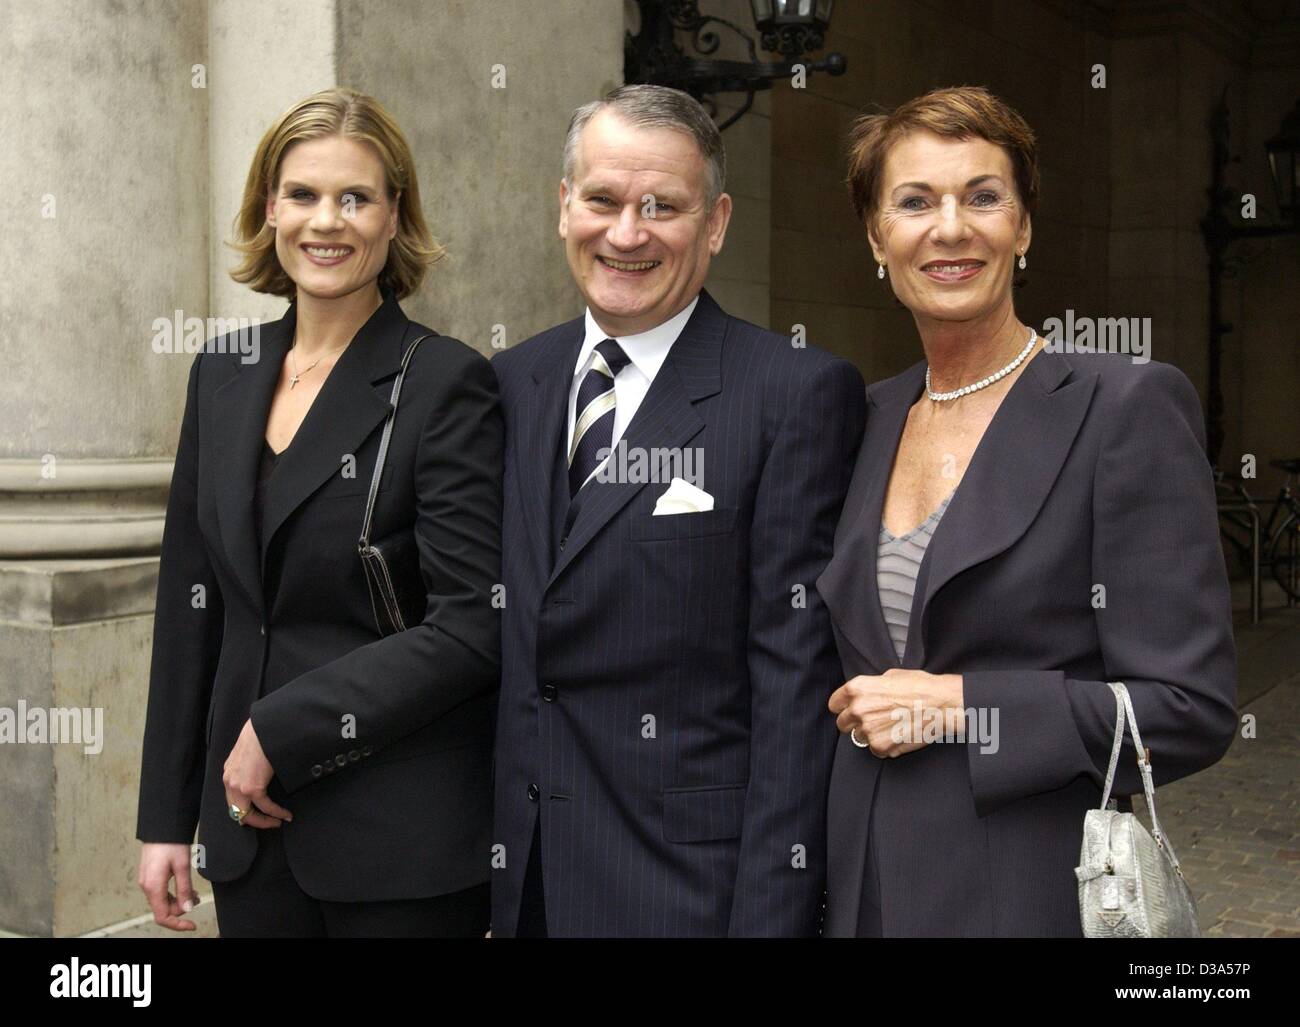 (dpa) - The German publisher Heinrich Bauer, his wife Gudrun and their daughter Miriam arrive to the 'Goldene Feder' (golden feather) media award in Hamburg, 24 May 2002. His publishing house, one of the biggest in Germany, honors outstanding achievements in the media with the award. Stock Photo